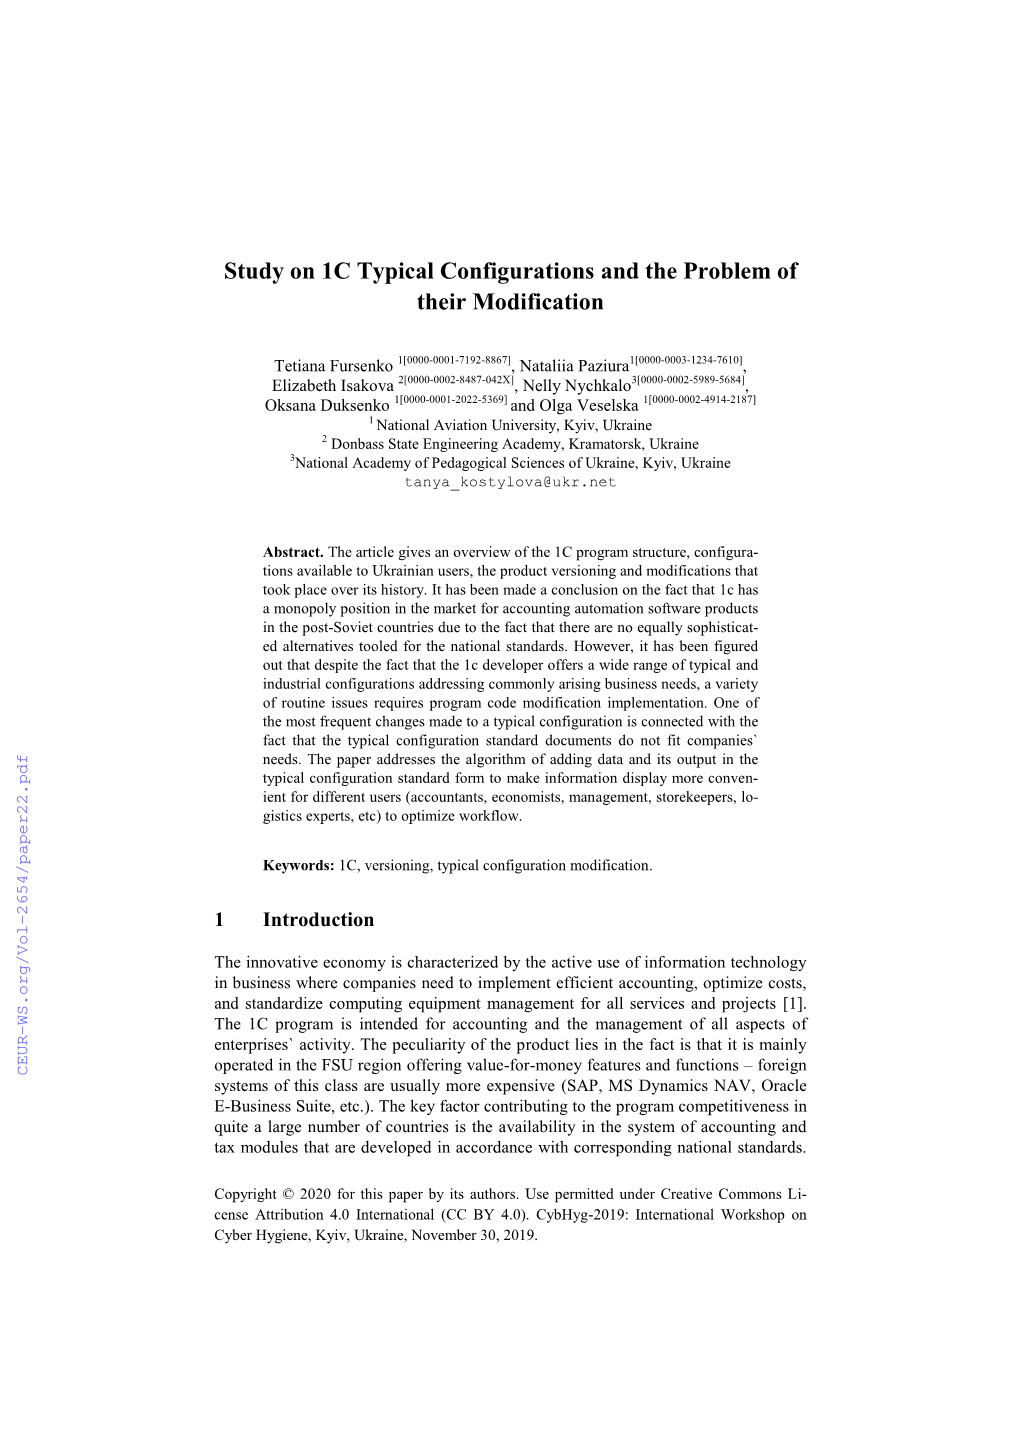 Study on 1C Typical Configurations and the Problem of Their Modification